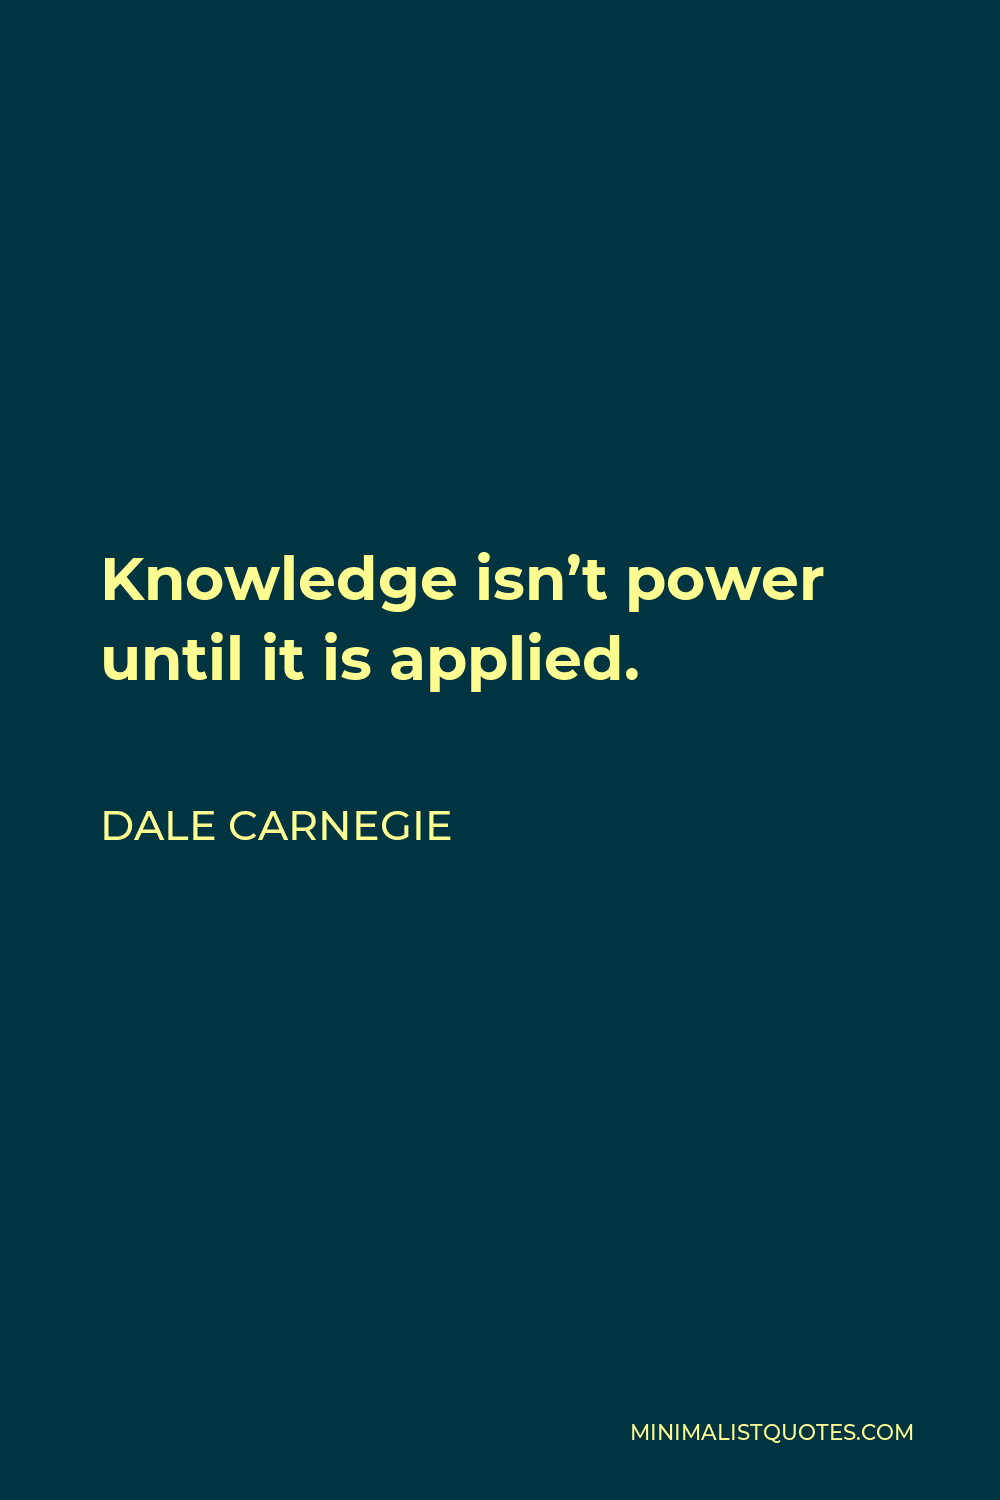 Dale Carnegie Quote - Knowledge isn’t power until it is applied.